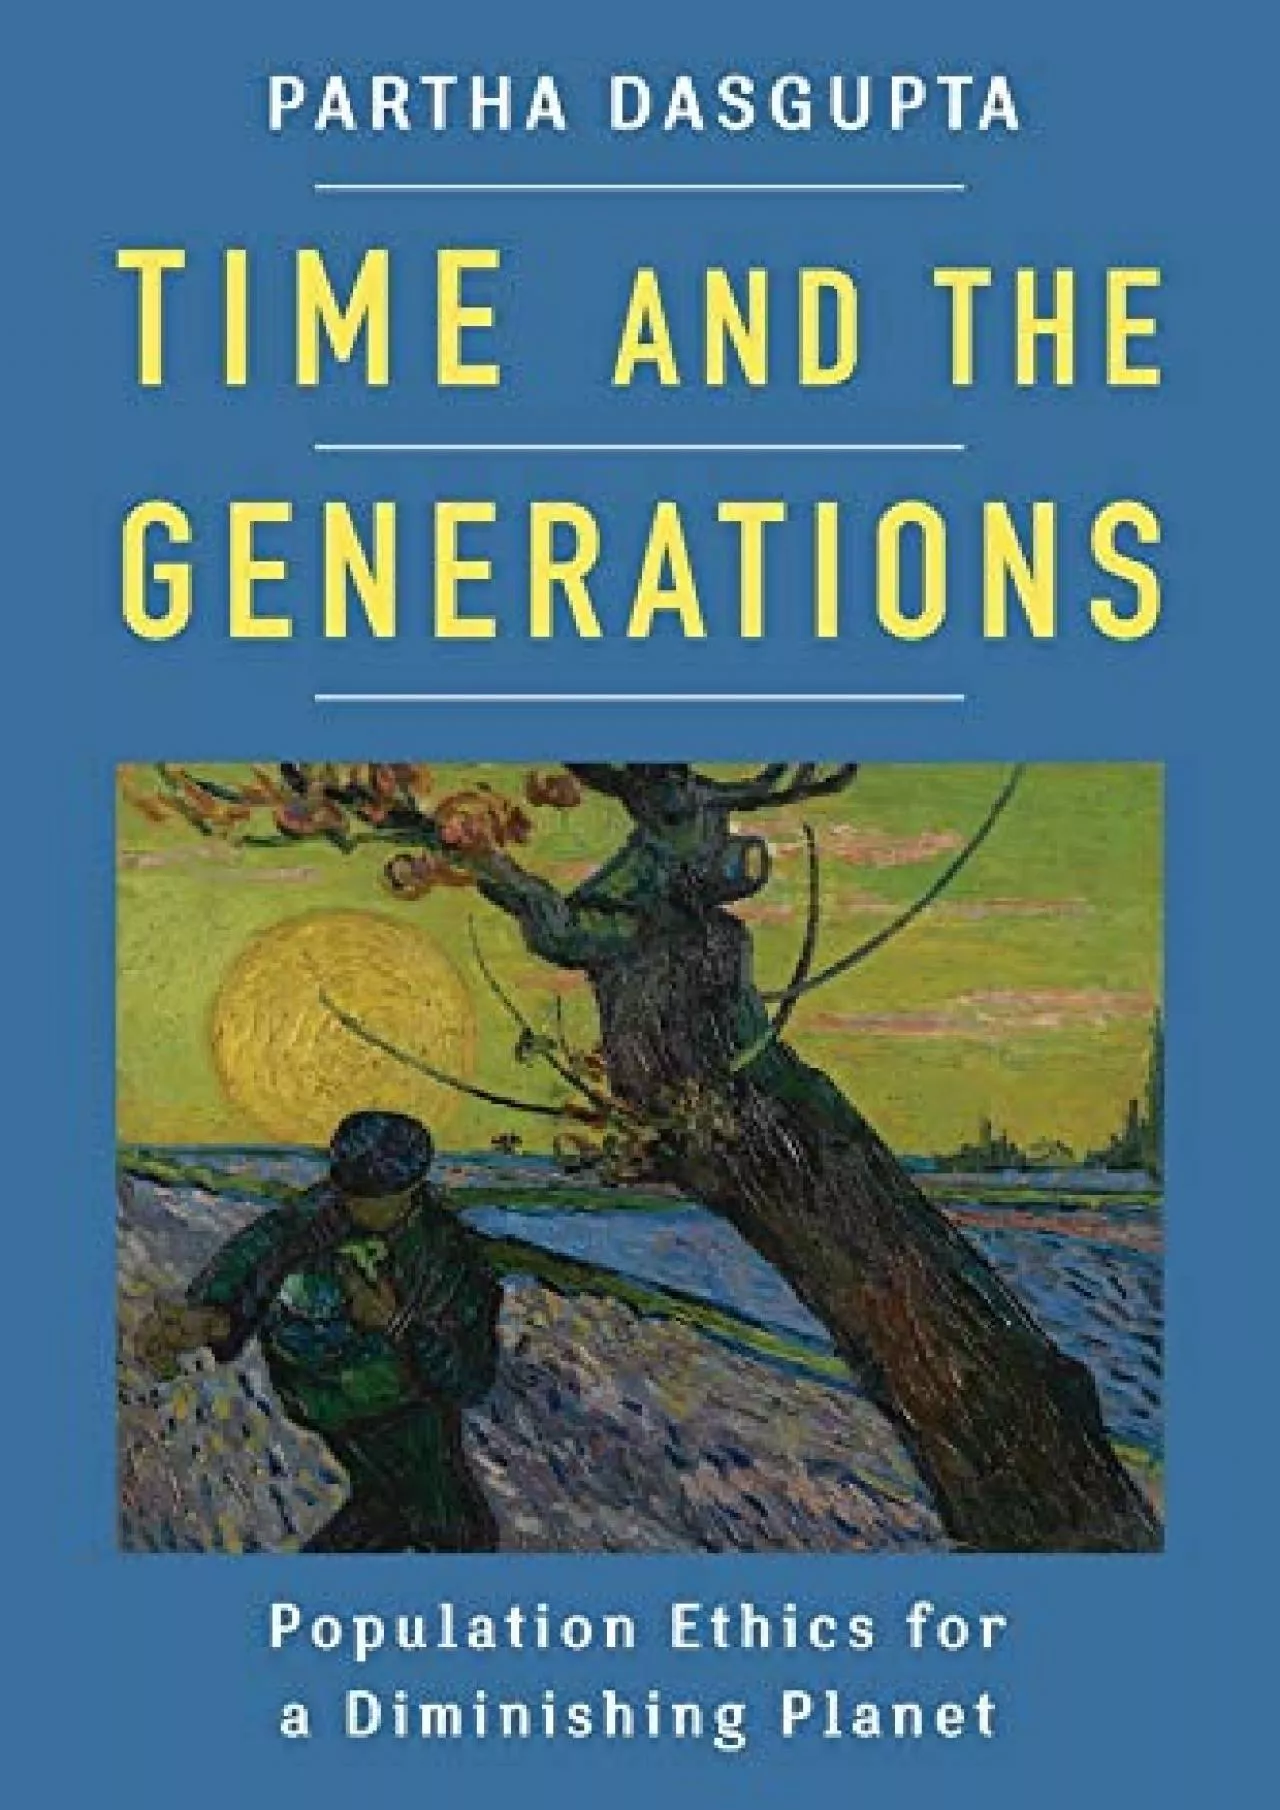 (DOWNLOAD)-Time and the Generations: Population Ethics for a Diminishing Planet (Kenneth